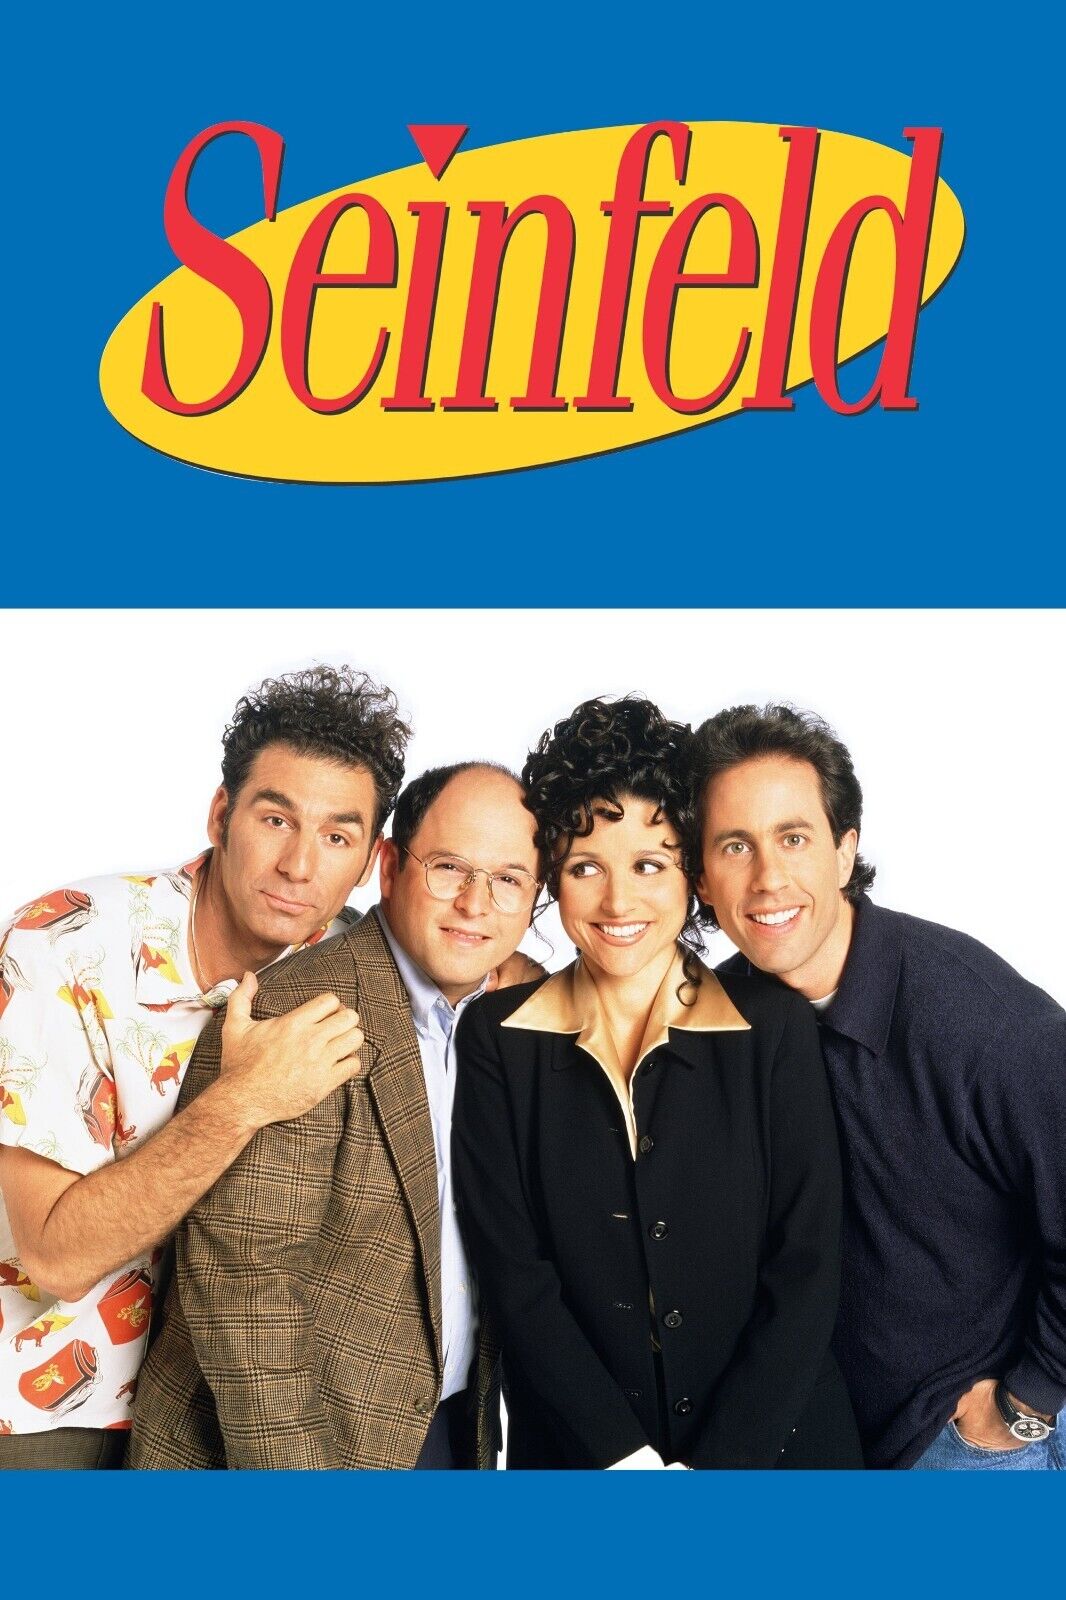 Seinfeld TV Series Poster - 11x17 Inches | NEW USA